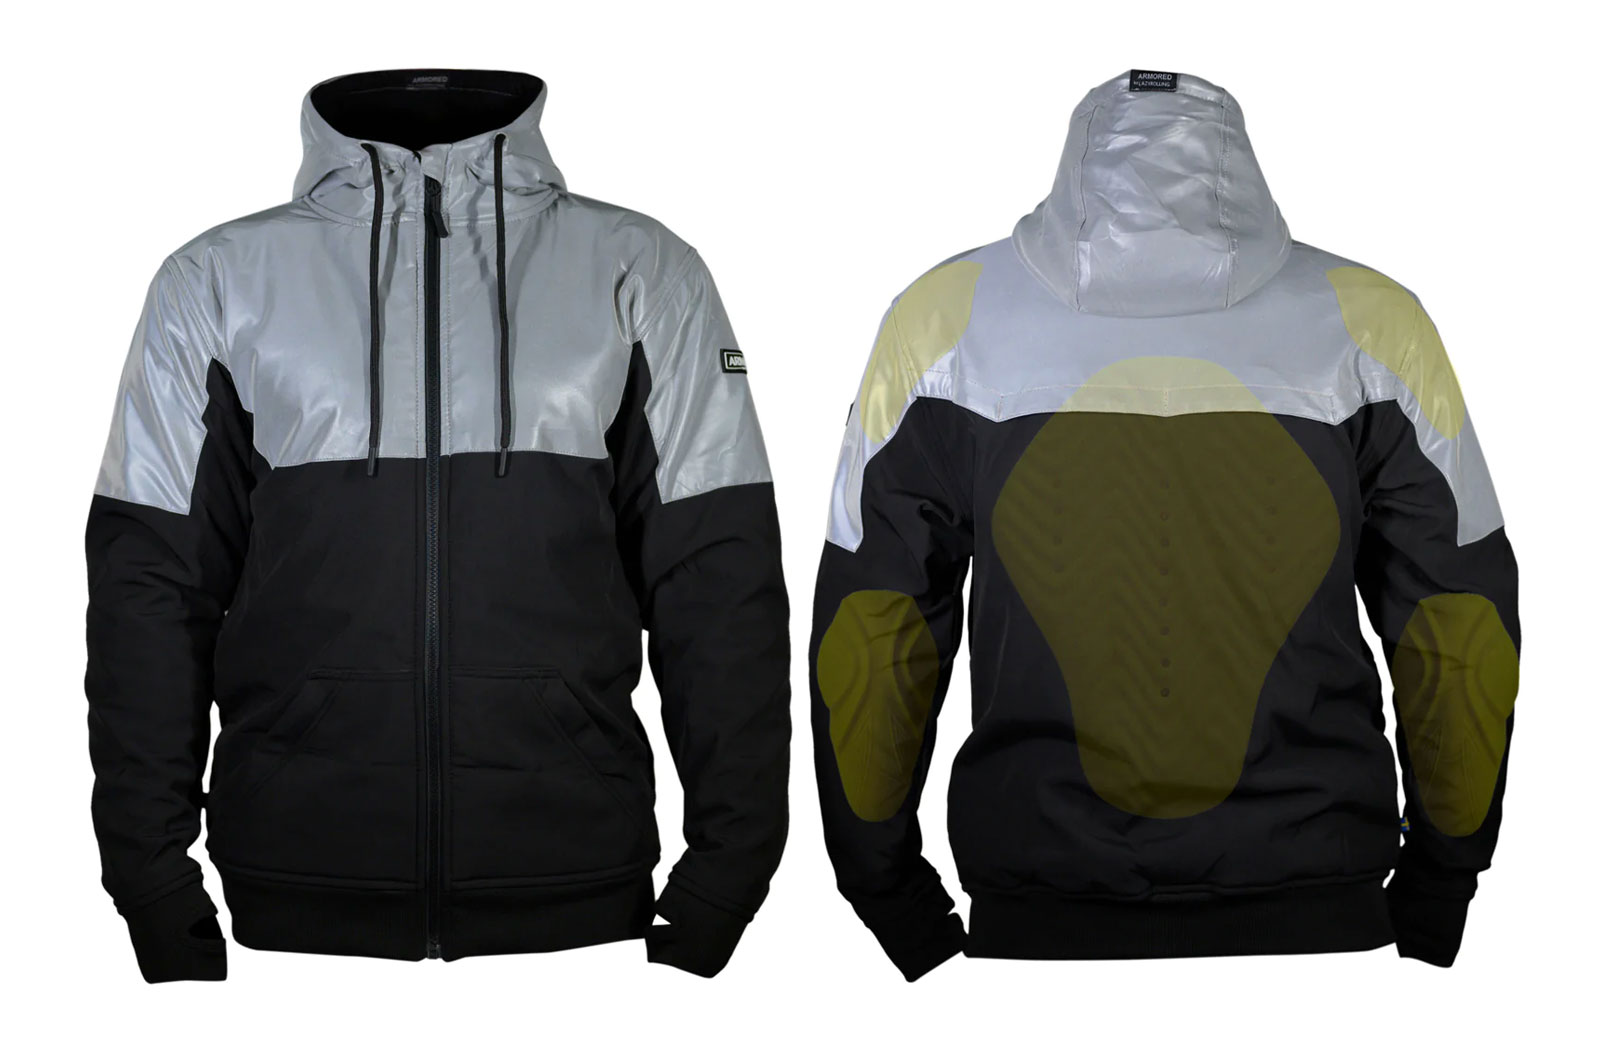 Riding Gear Review - Lazyrolling Armored Reflective Jacket